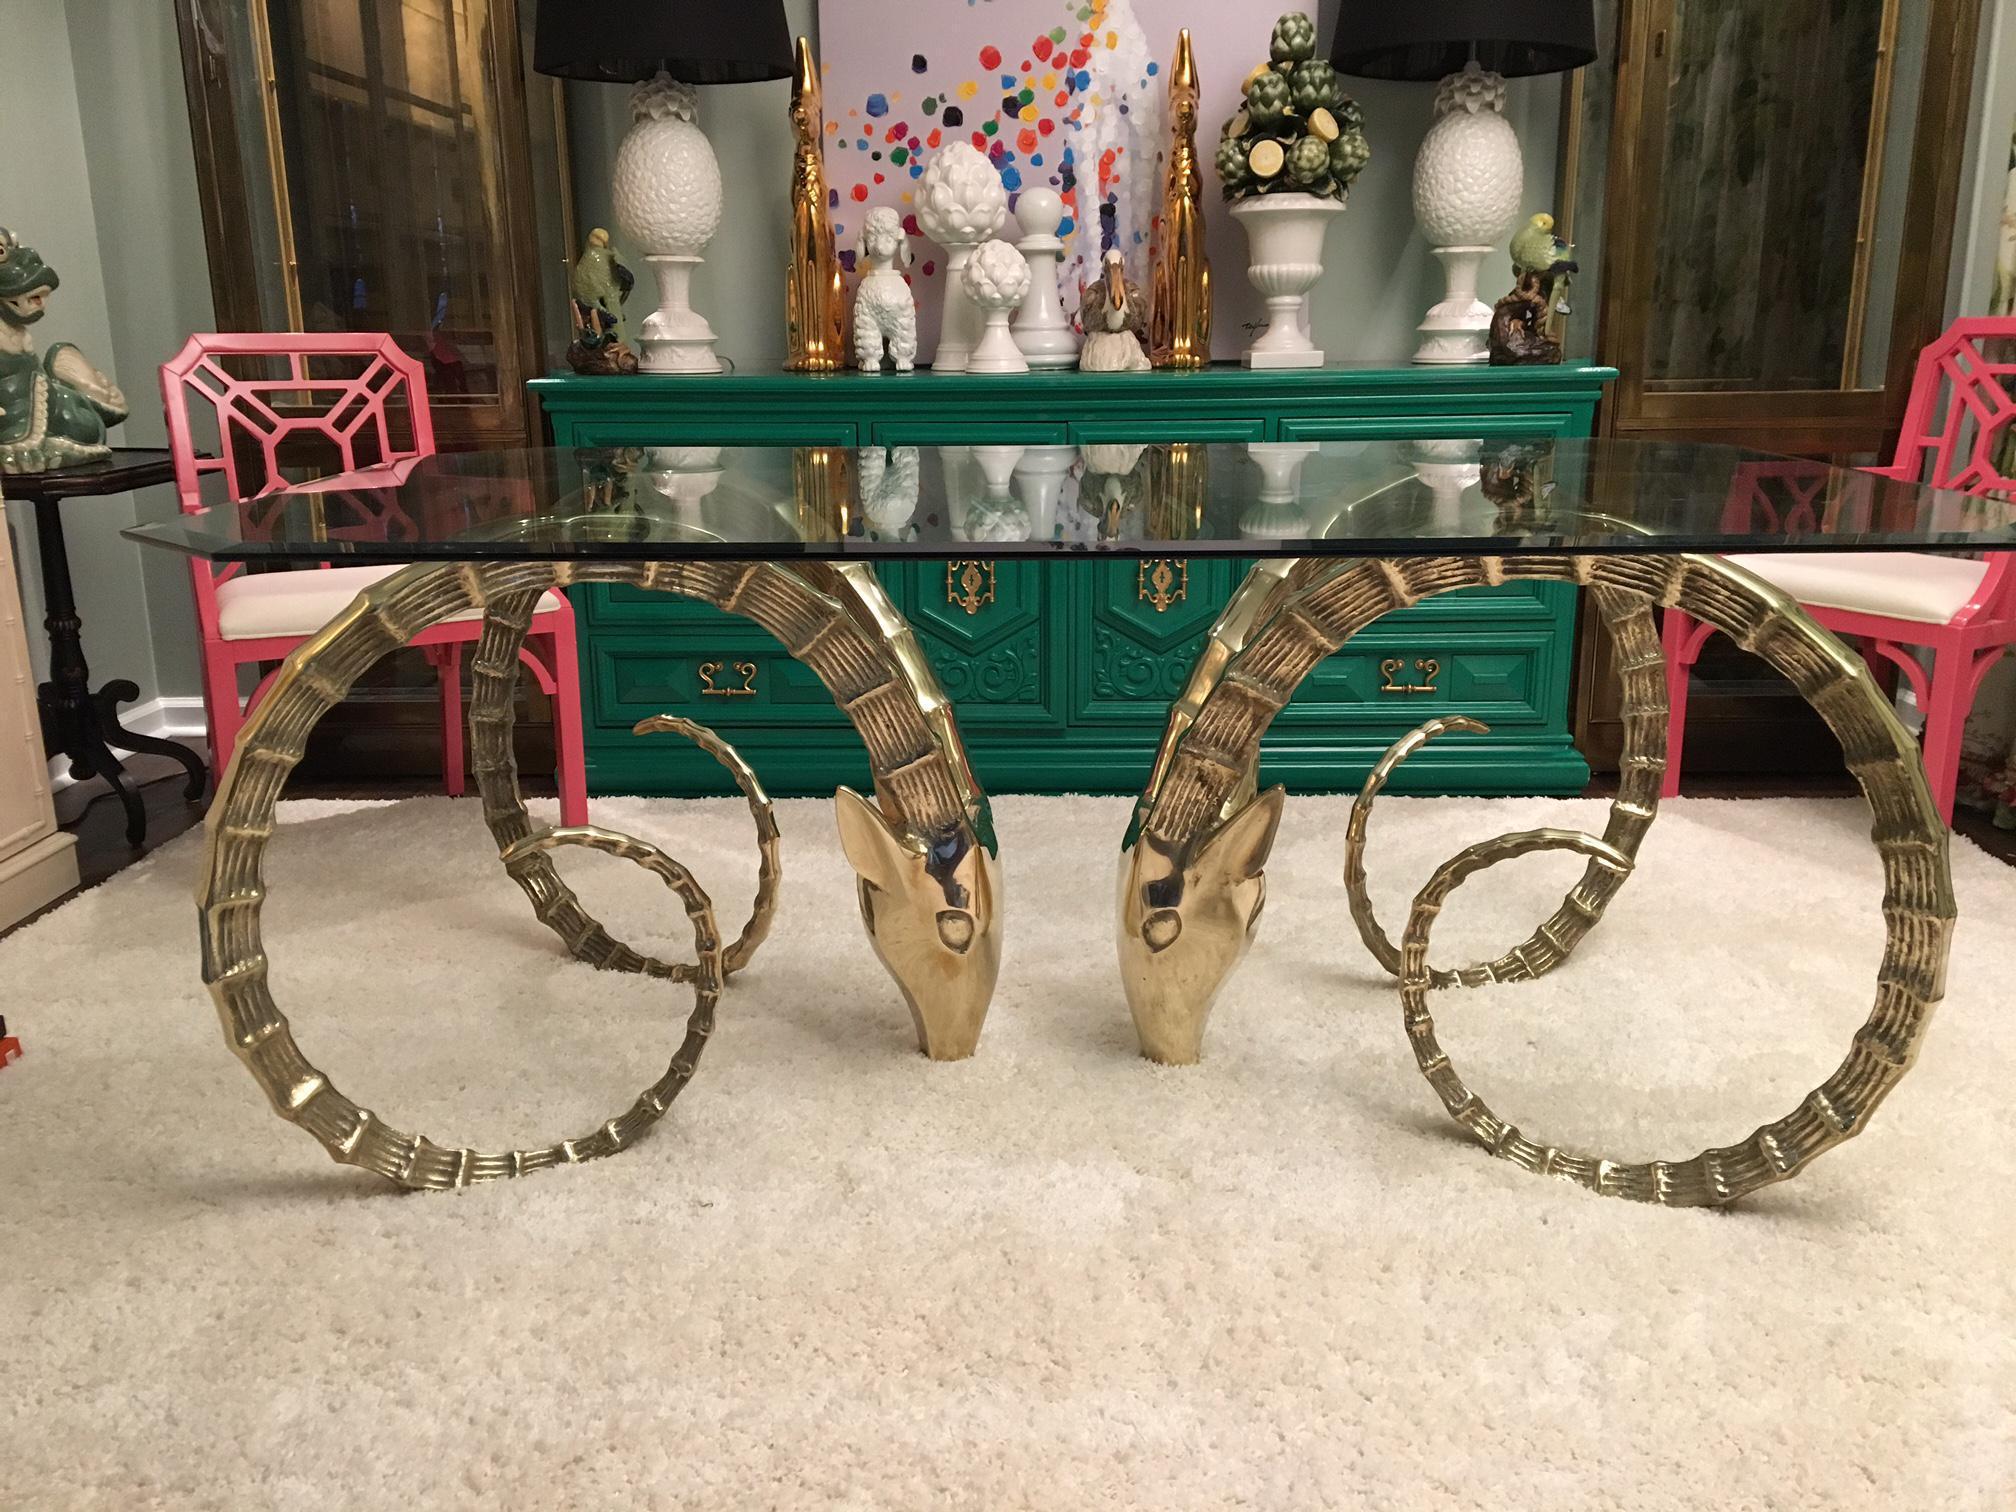 Monumental solid brass Ibex ram's head dining table with your choice of glass top. 

Glass top (shown in first photo) measures 90